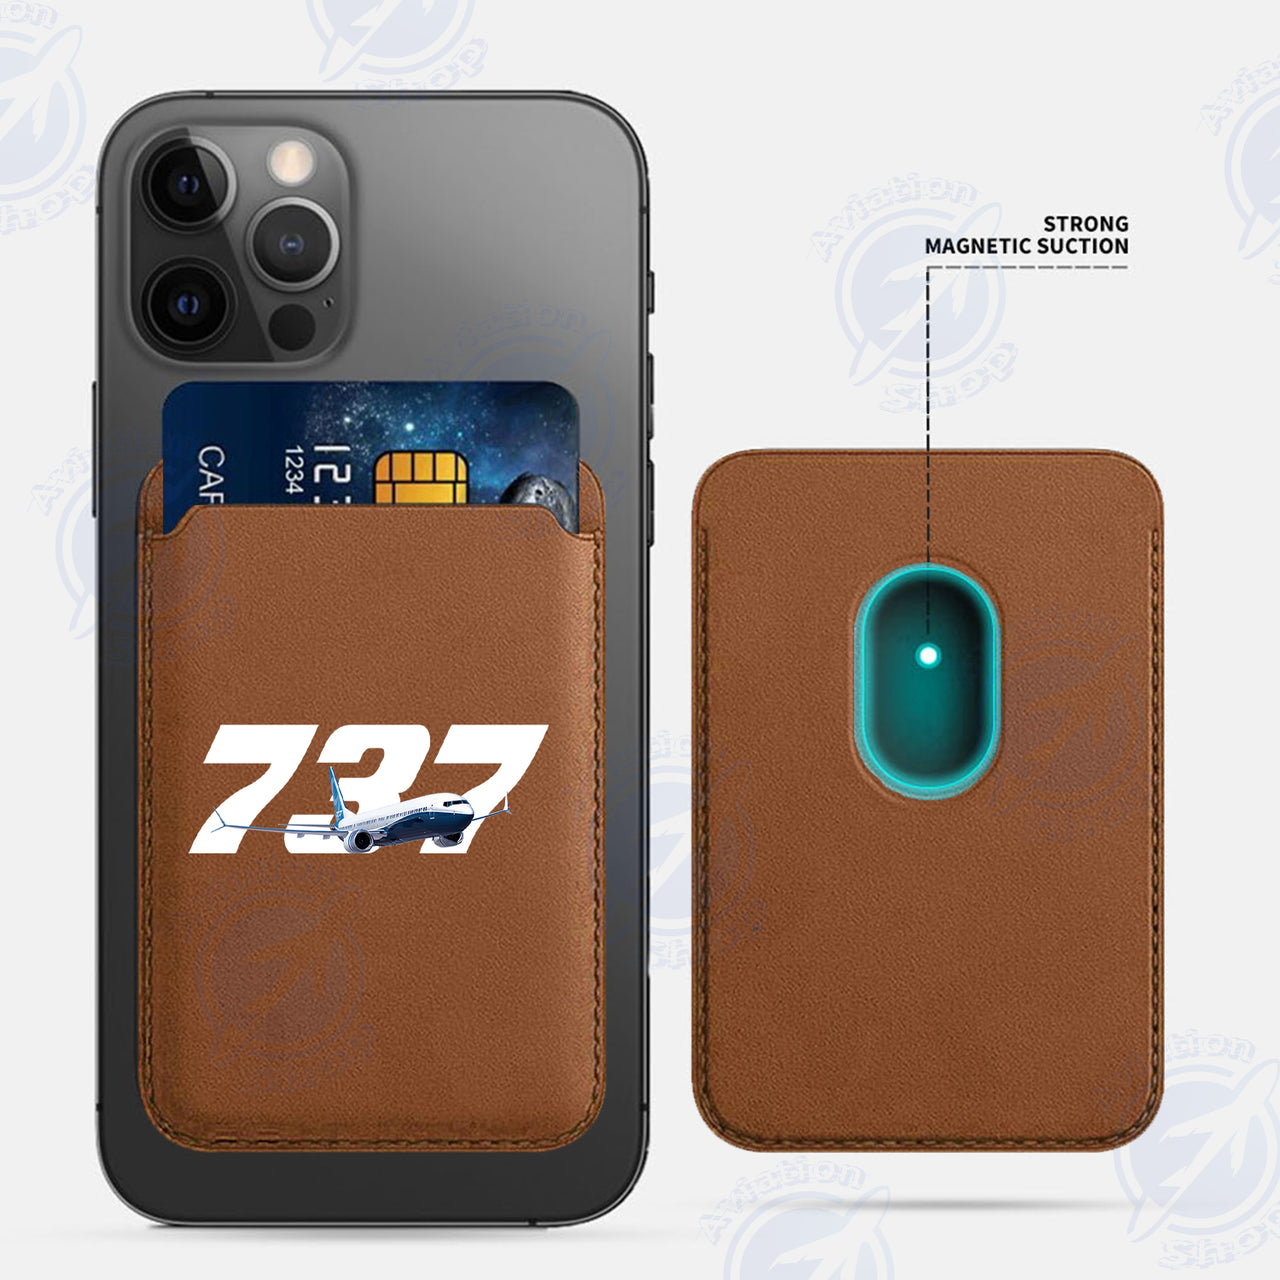 Super Boeing 737 iPhone Cases Magnetic Card Wallet